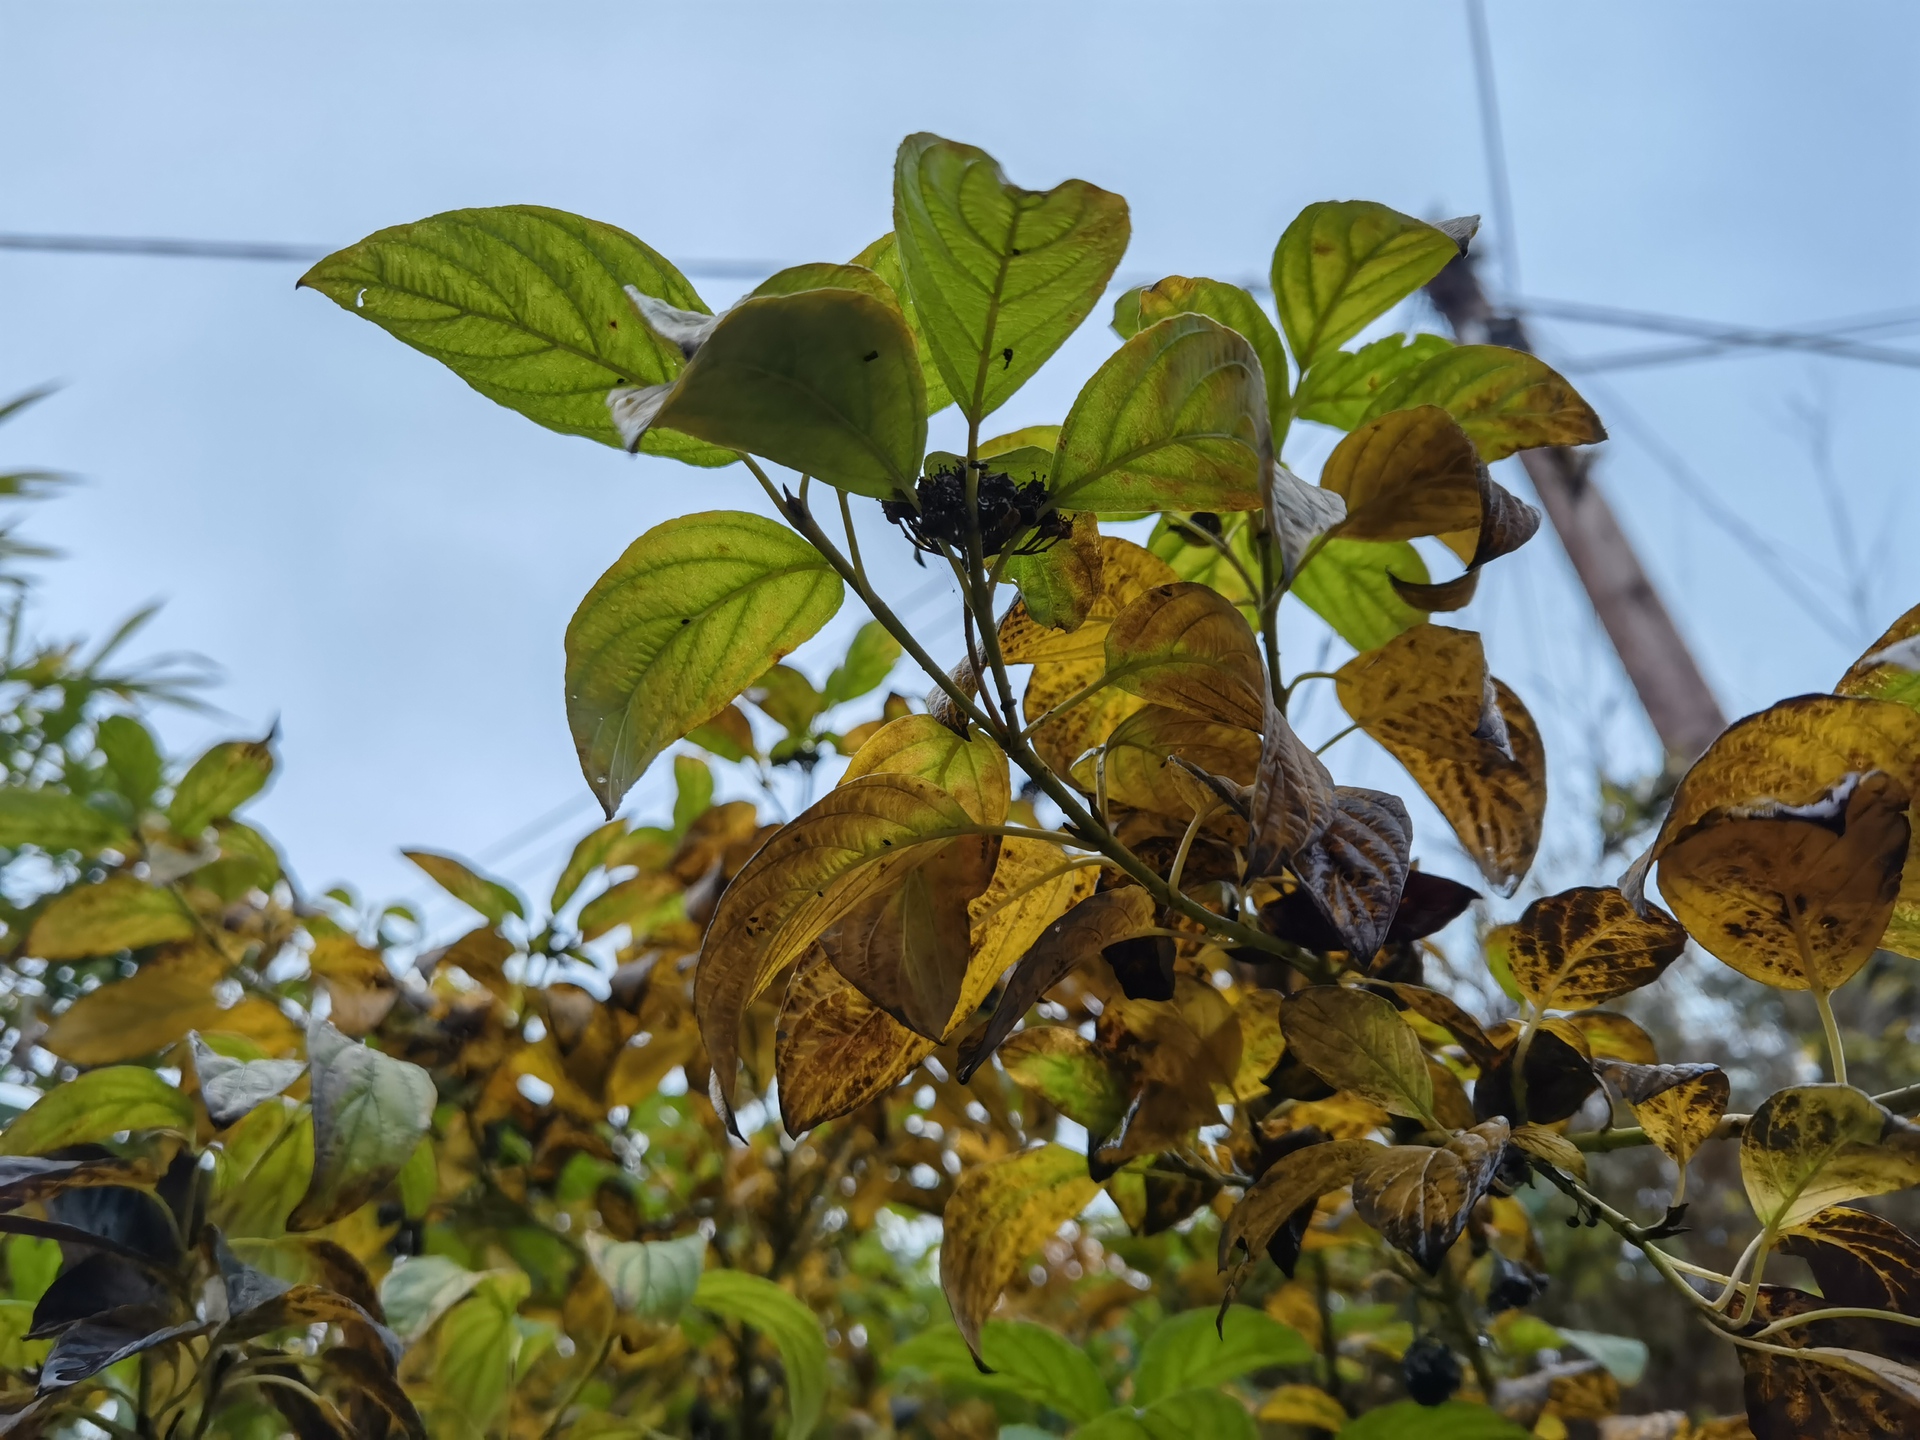 Huawei Mate 40 Pro photo sample of some leaves